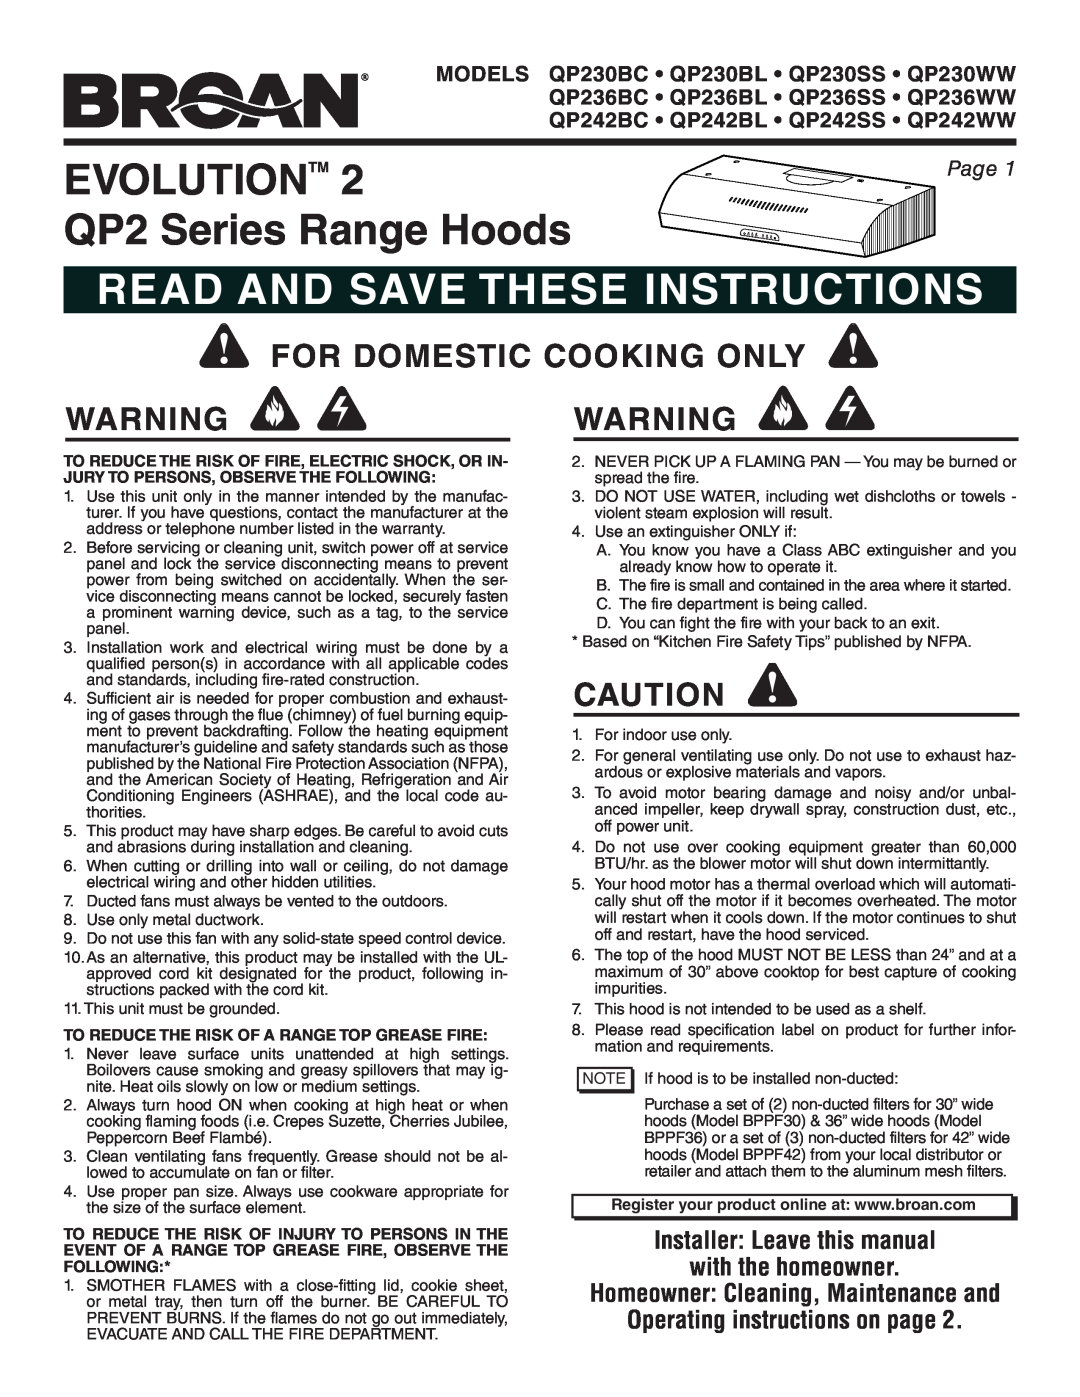 Broan QP242BL manual Evolution, QP2 Series Range Hoods, Read And Save These Instructions, For Domestic Cooking Only, Page 